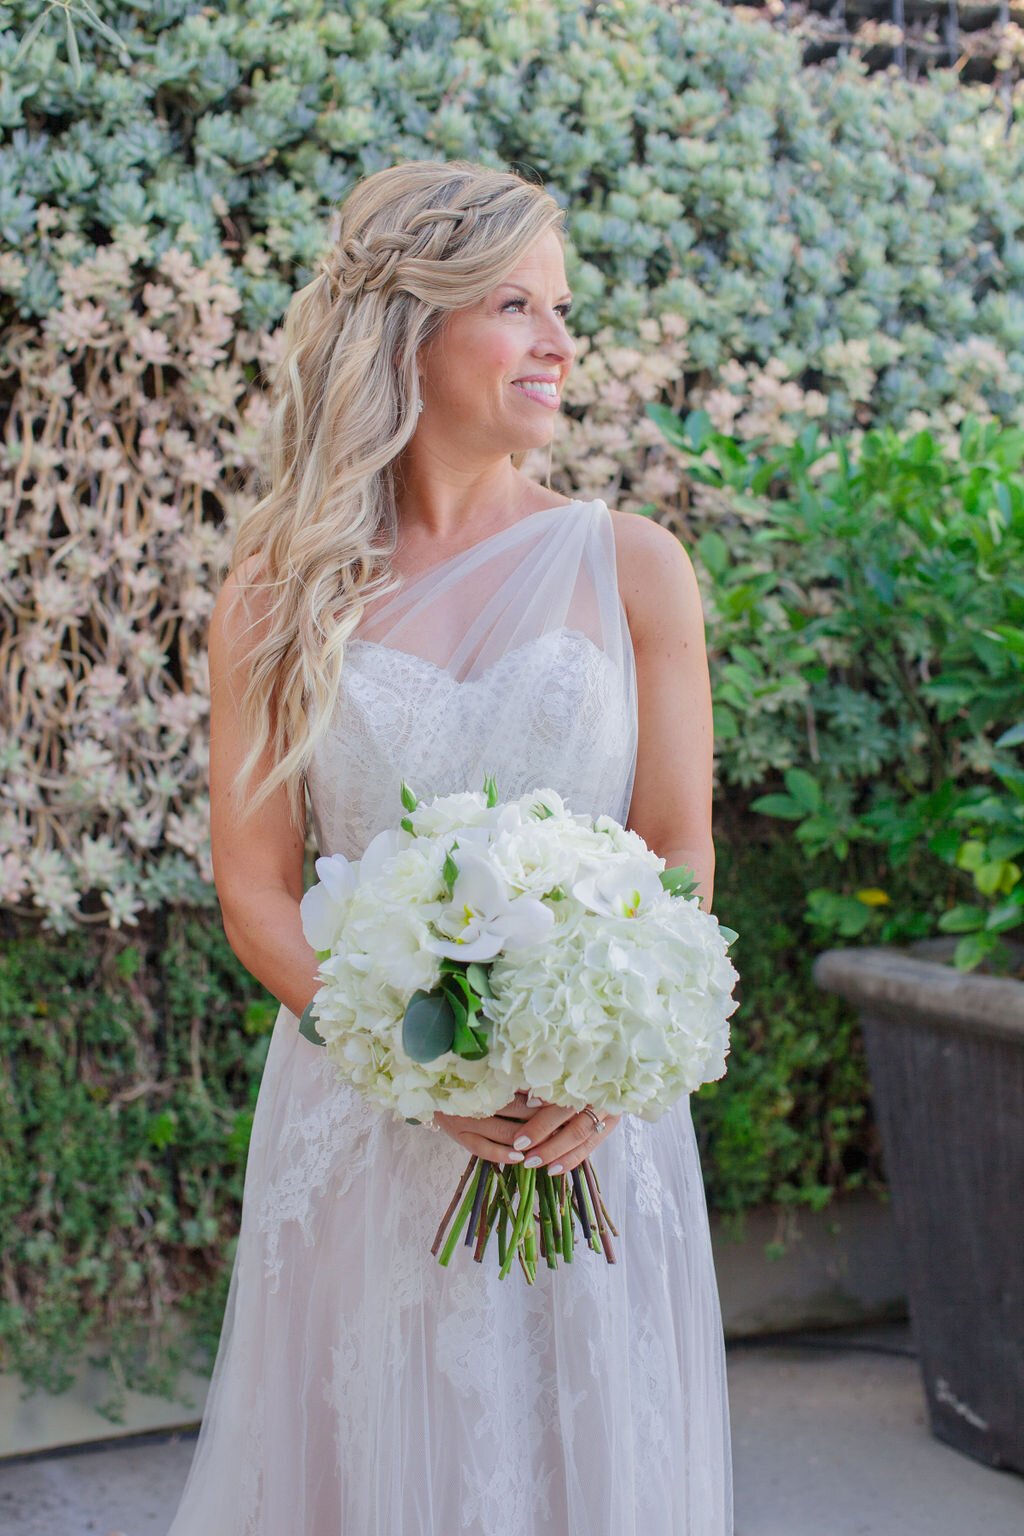 www.santabarbarawedding.com | Fess Parker Wine Country Inn | Epiphany Events | Linda Chaja | Wild Poppy Floral Design | LunaBella | Bride with Her Bouquet